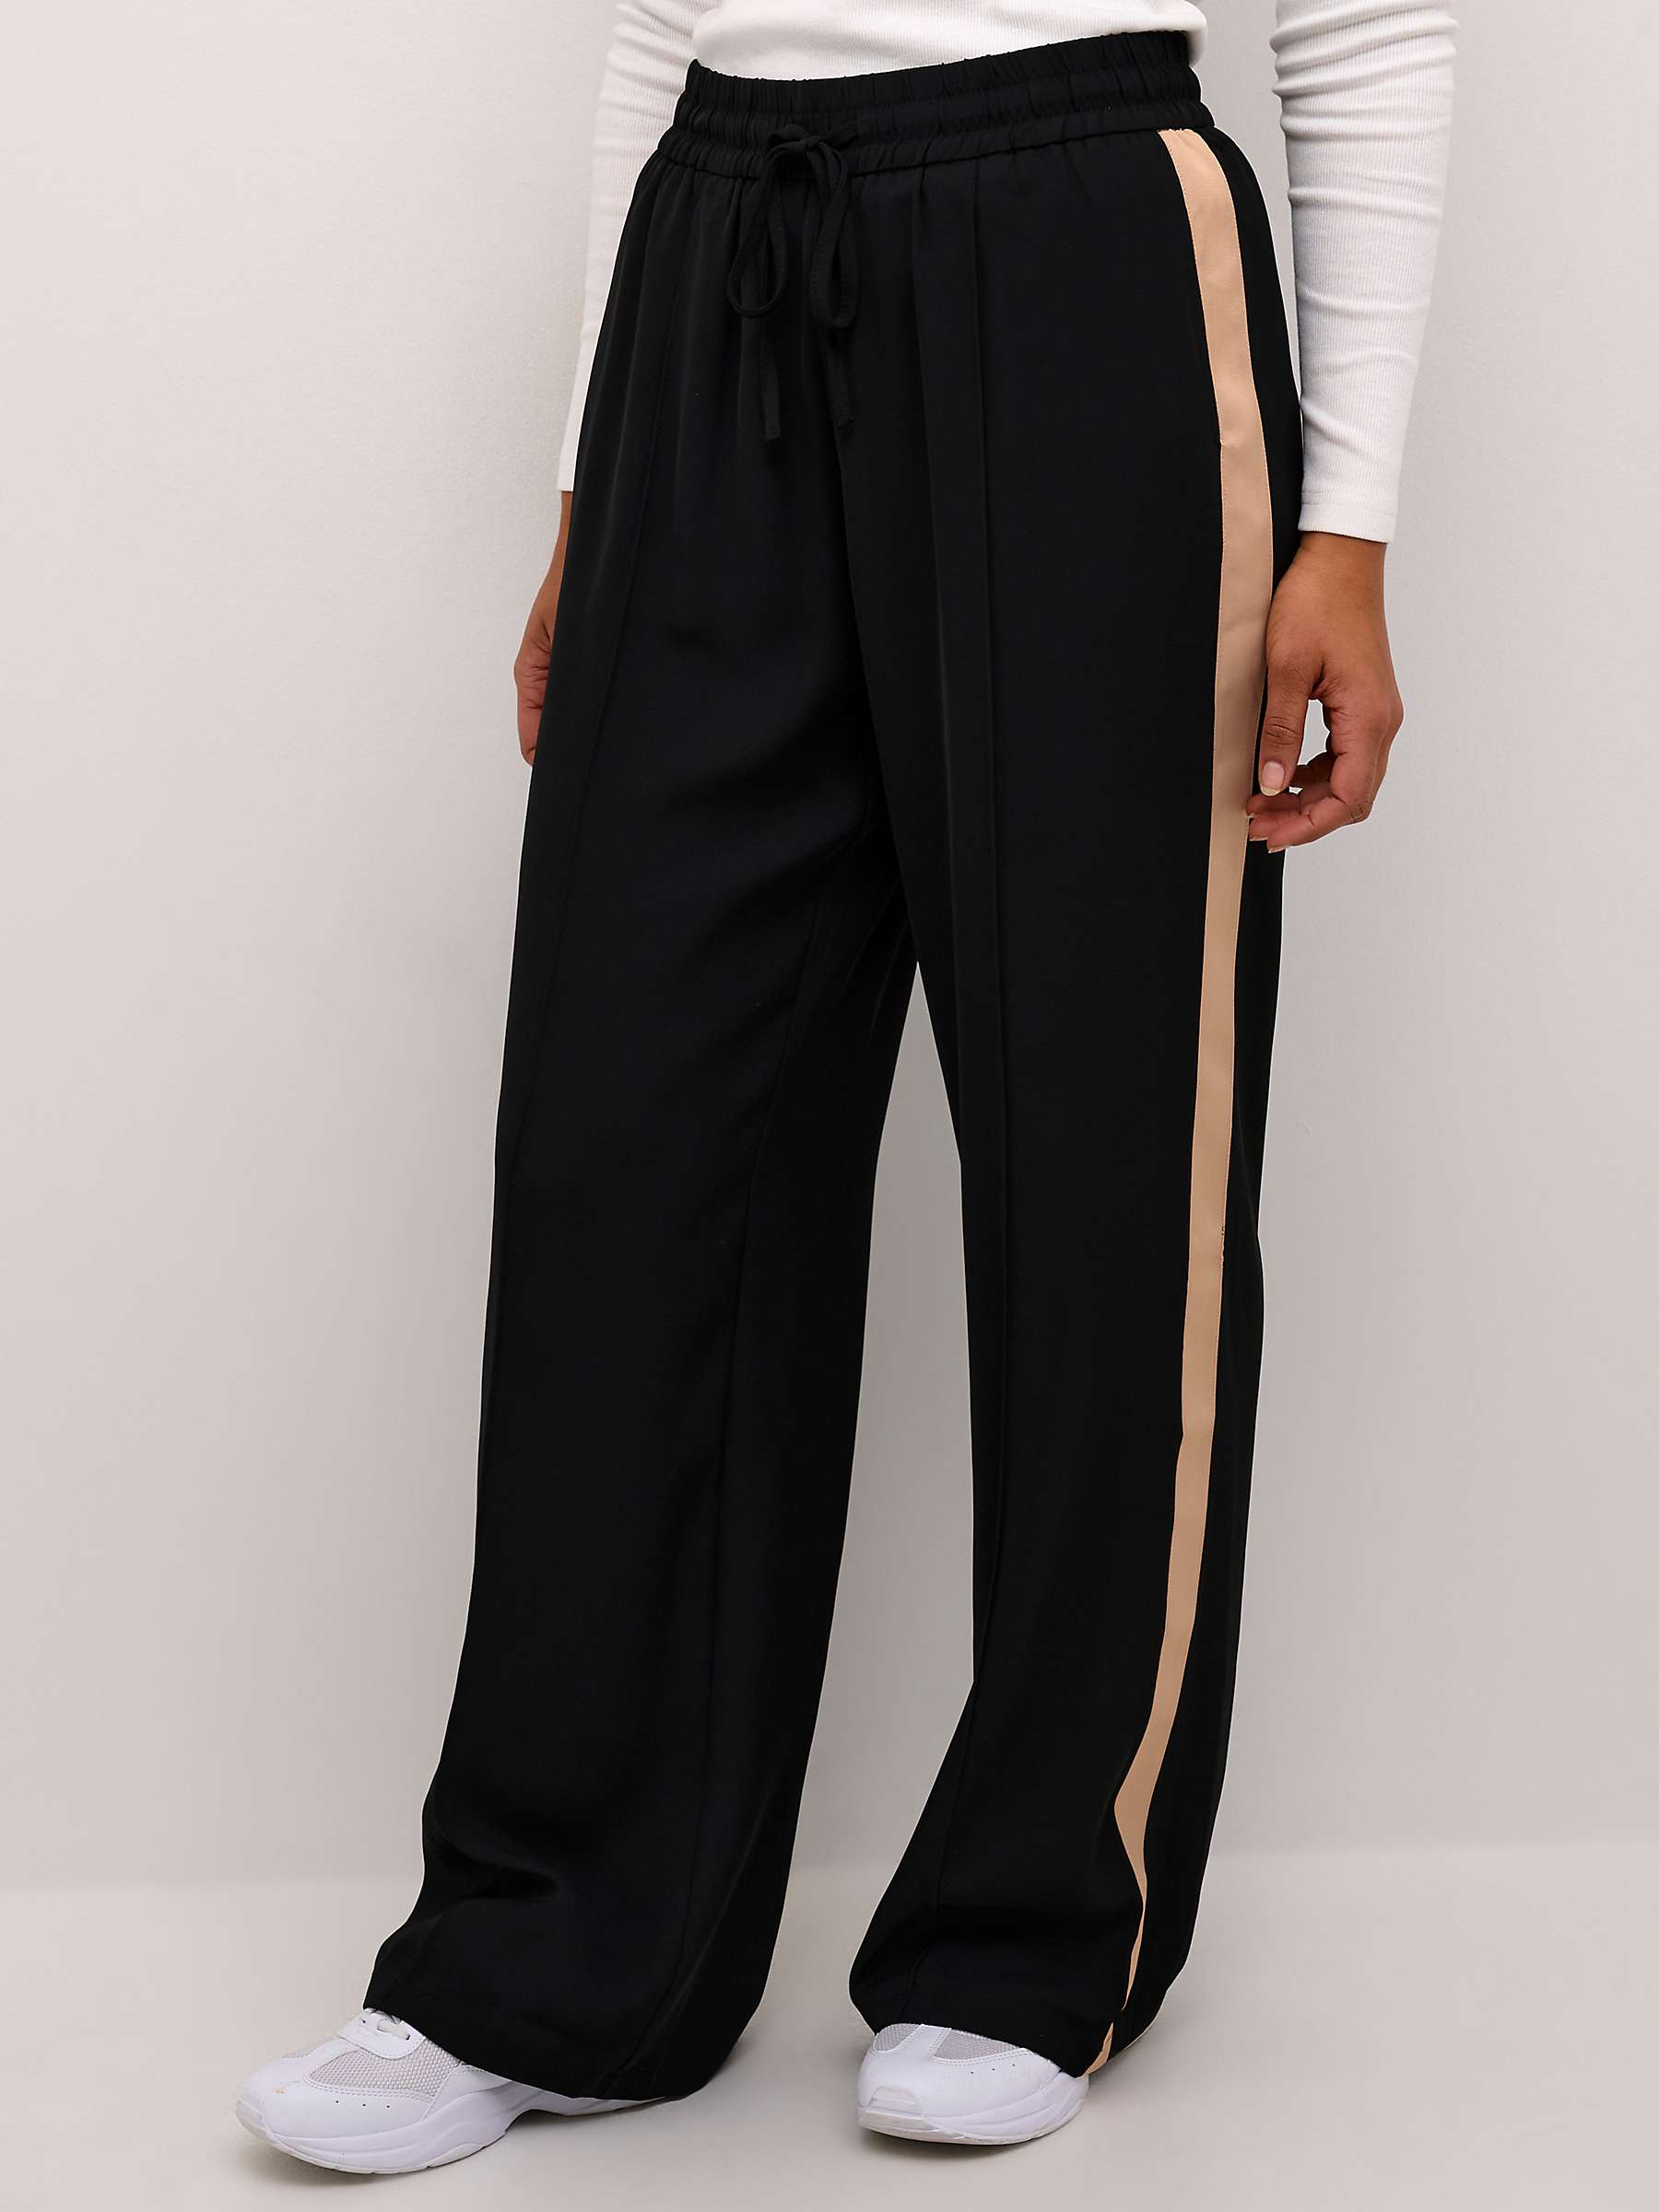 Buy KAFFE Signa High Waisted Striped Trousers, Black Deep Online at johnlewis.com